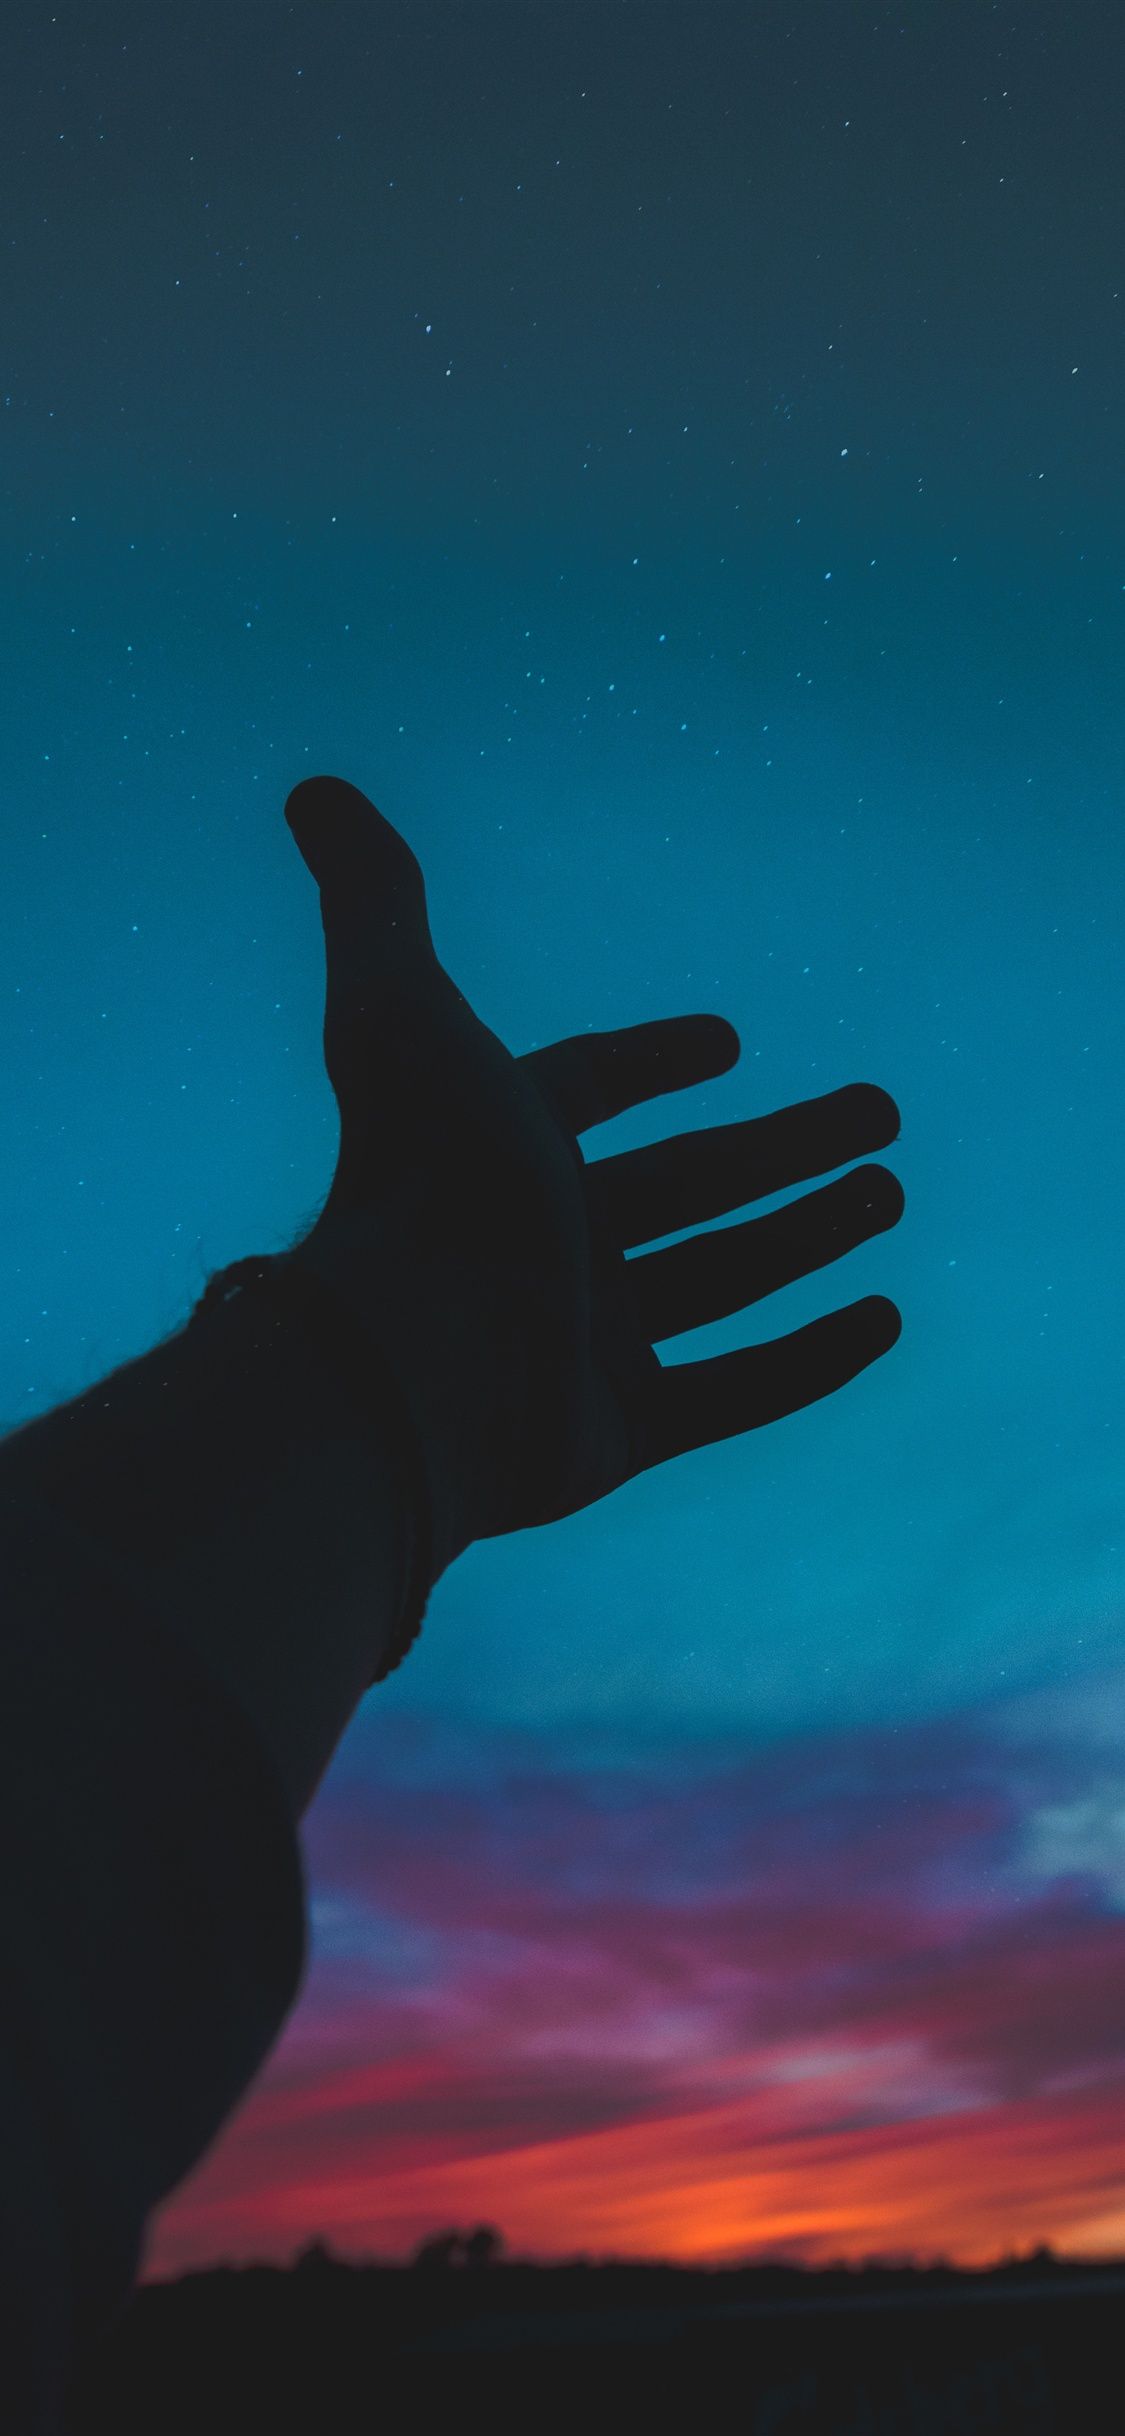 Hand, night, sky, silhouette iPhone XS Max, X 3GS wallpaper download